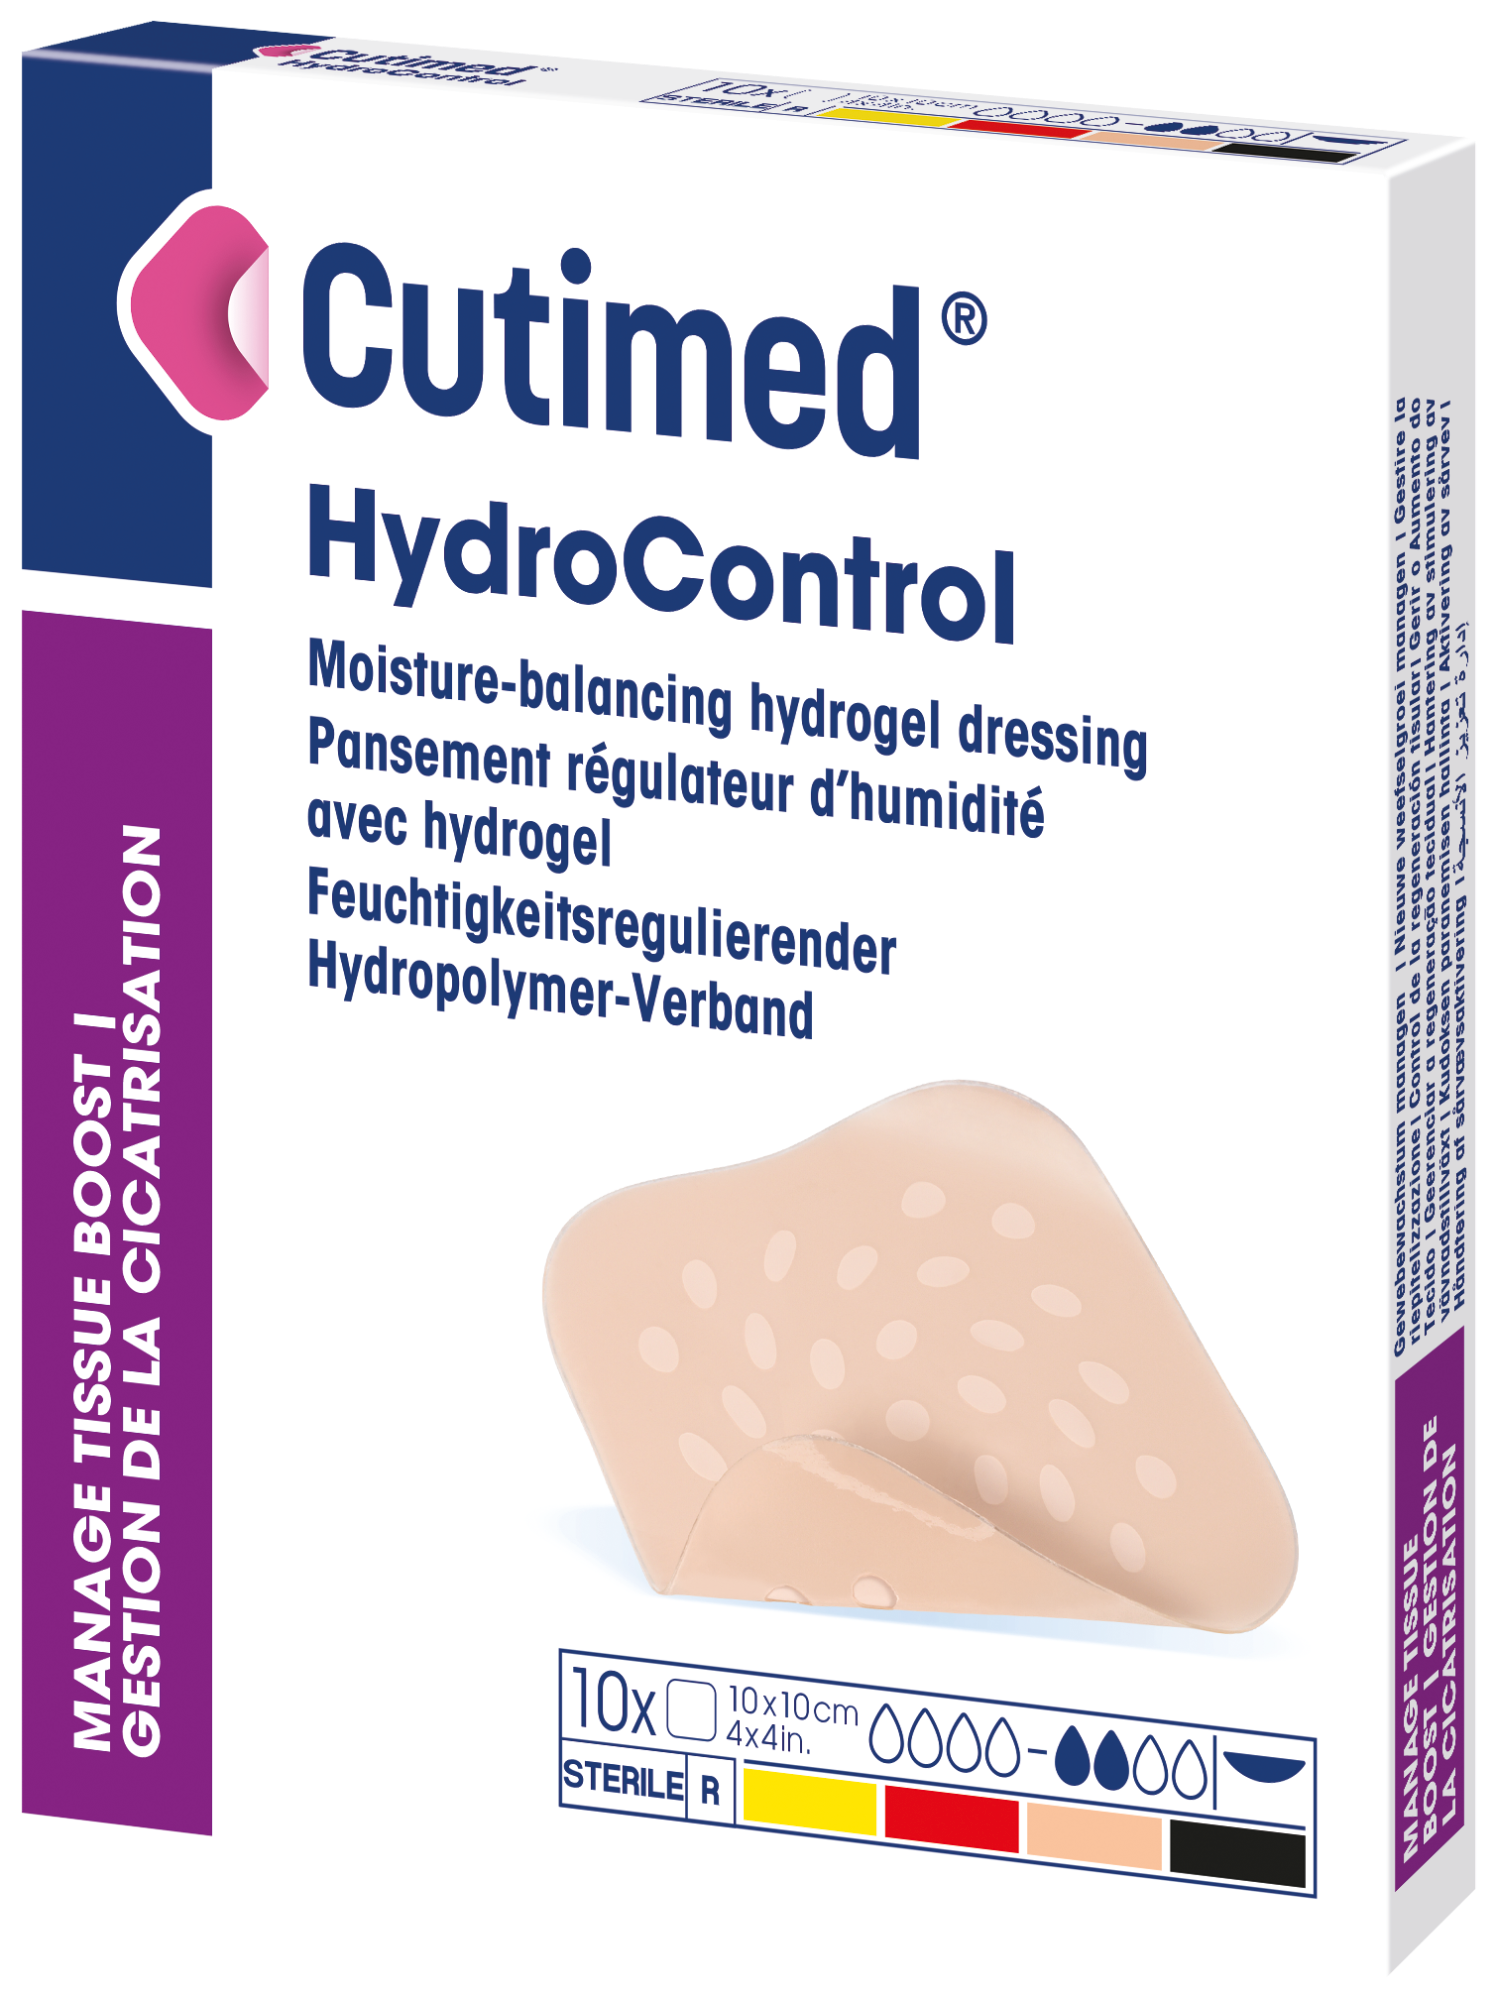 Image showing a packshot of Cutimed® HydroControl